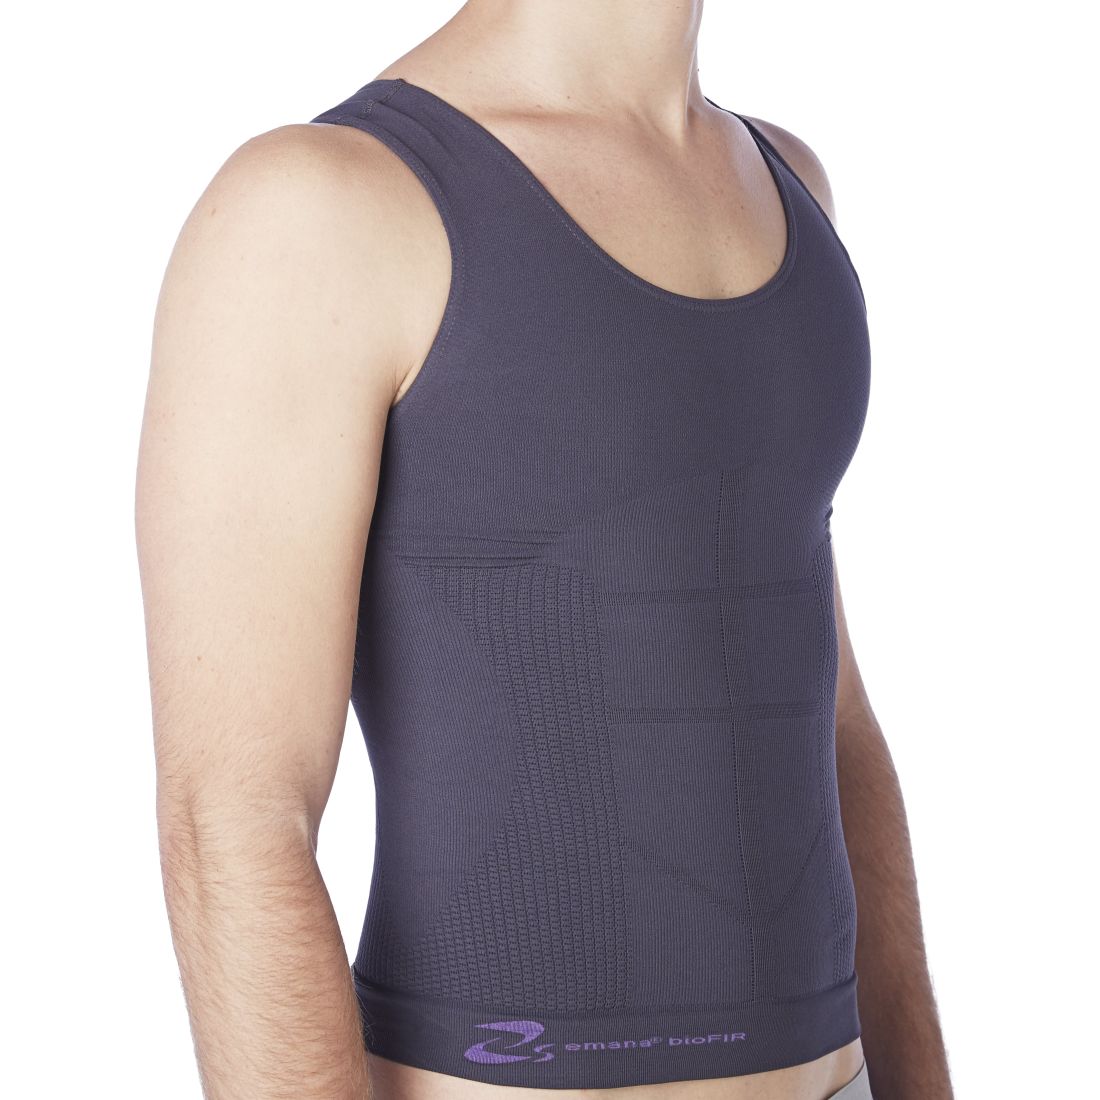 Farmacell Man 417B Men’s Body Shaping Vest with Light and Refreshing Breeze Yarn